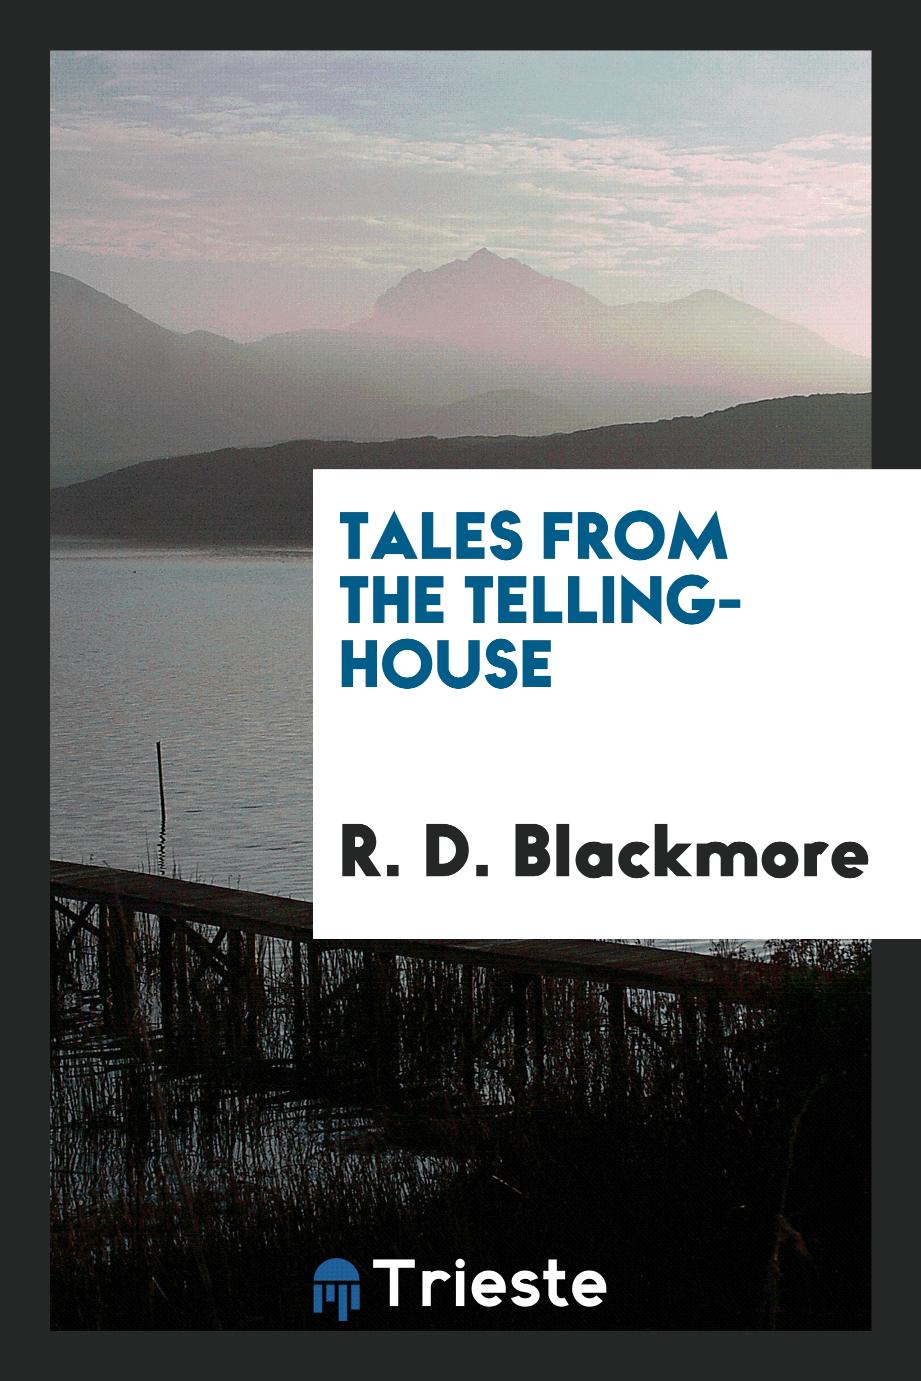 Tales from the telling-house